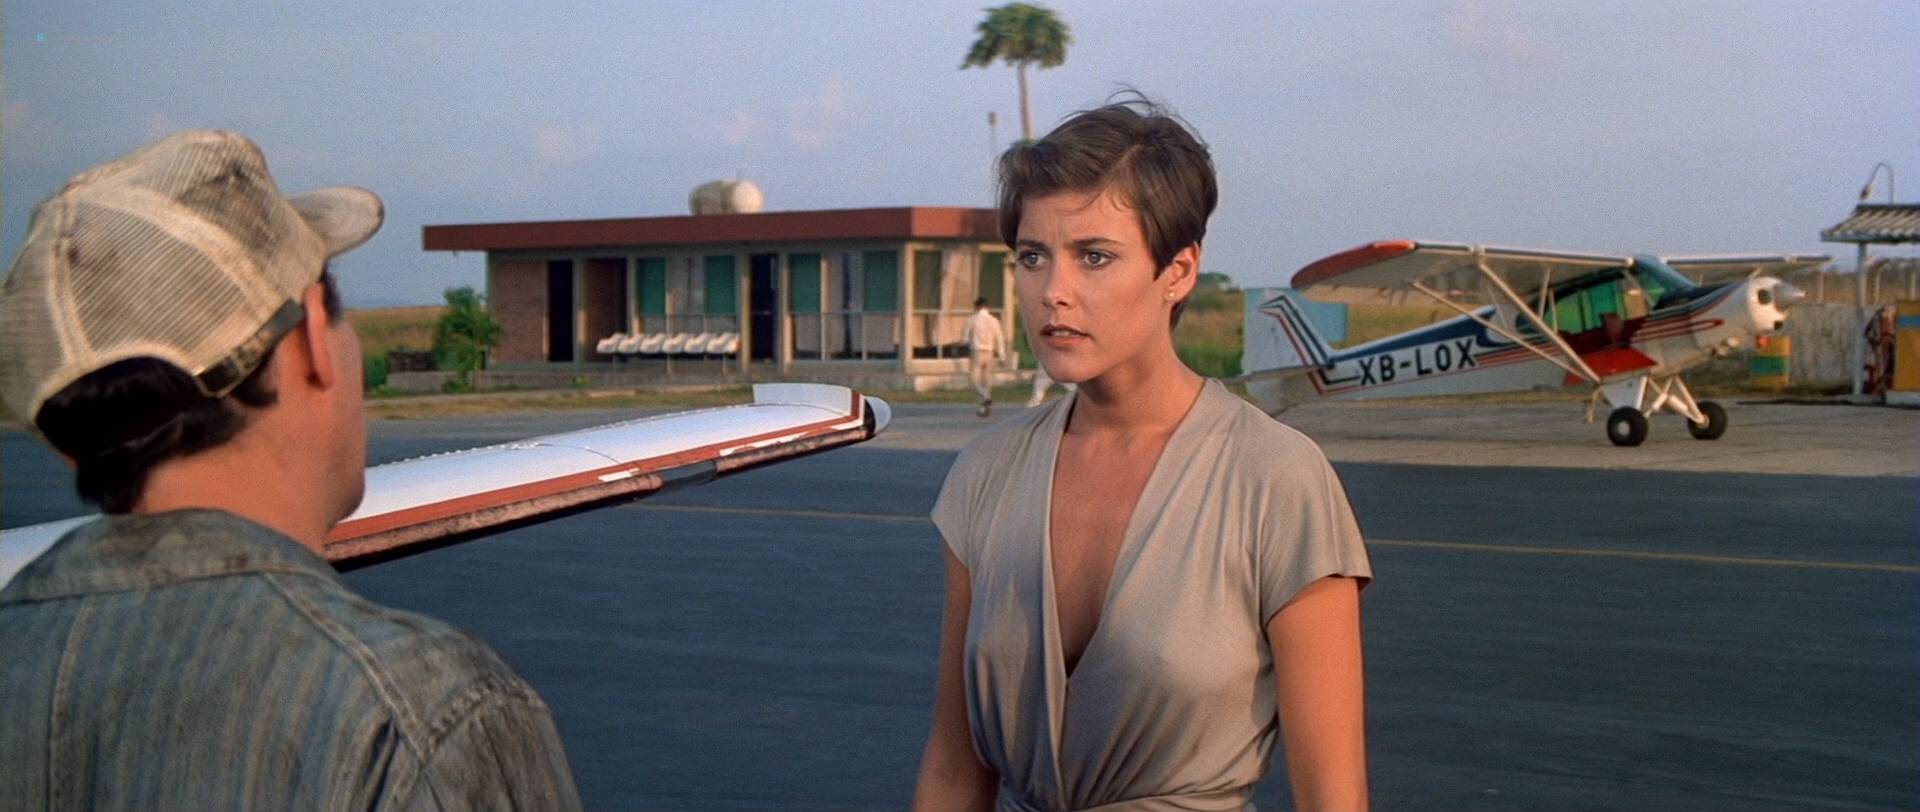 Carey Lowell hot leggy Talisa Soto hot and sexy - Licence to Kill (1989) HD 1080p BluRay (4)